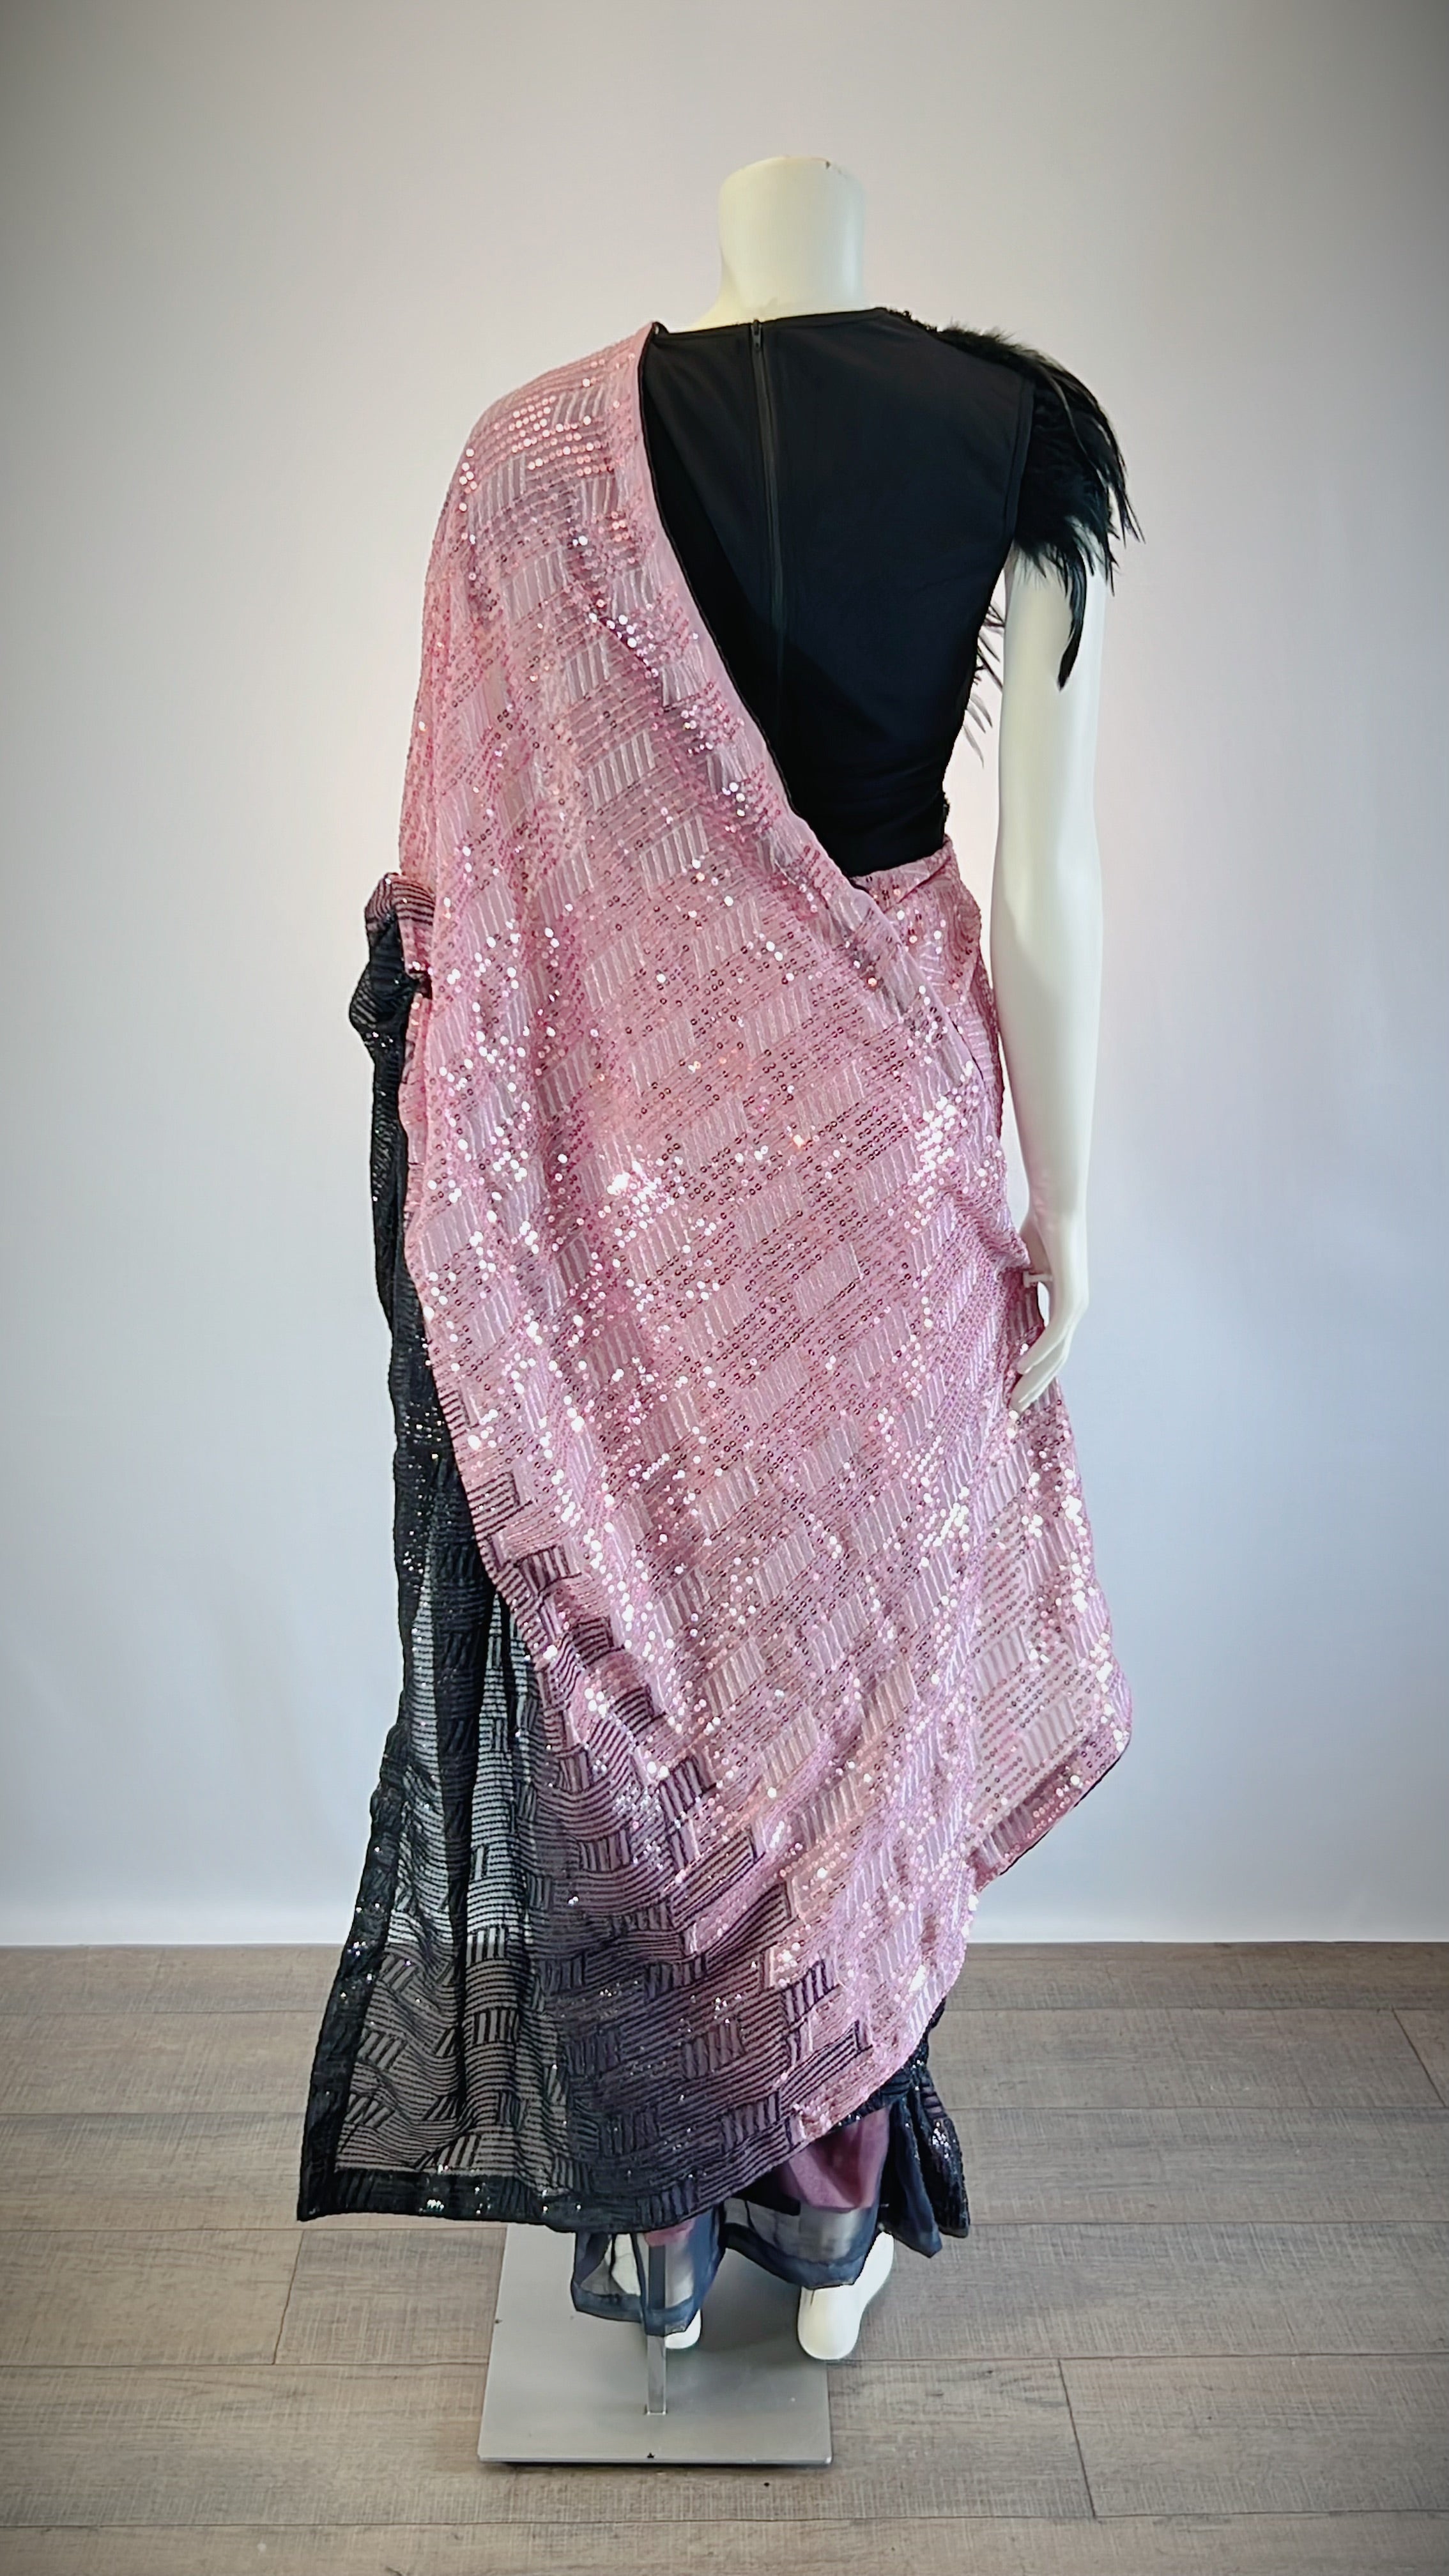 Black and Pink Sequins Georgette Pre-Stitched Saree with Designer Feather Blouse - Exquisite Fashion for Discerning Women | Buy Now